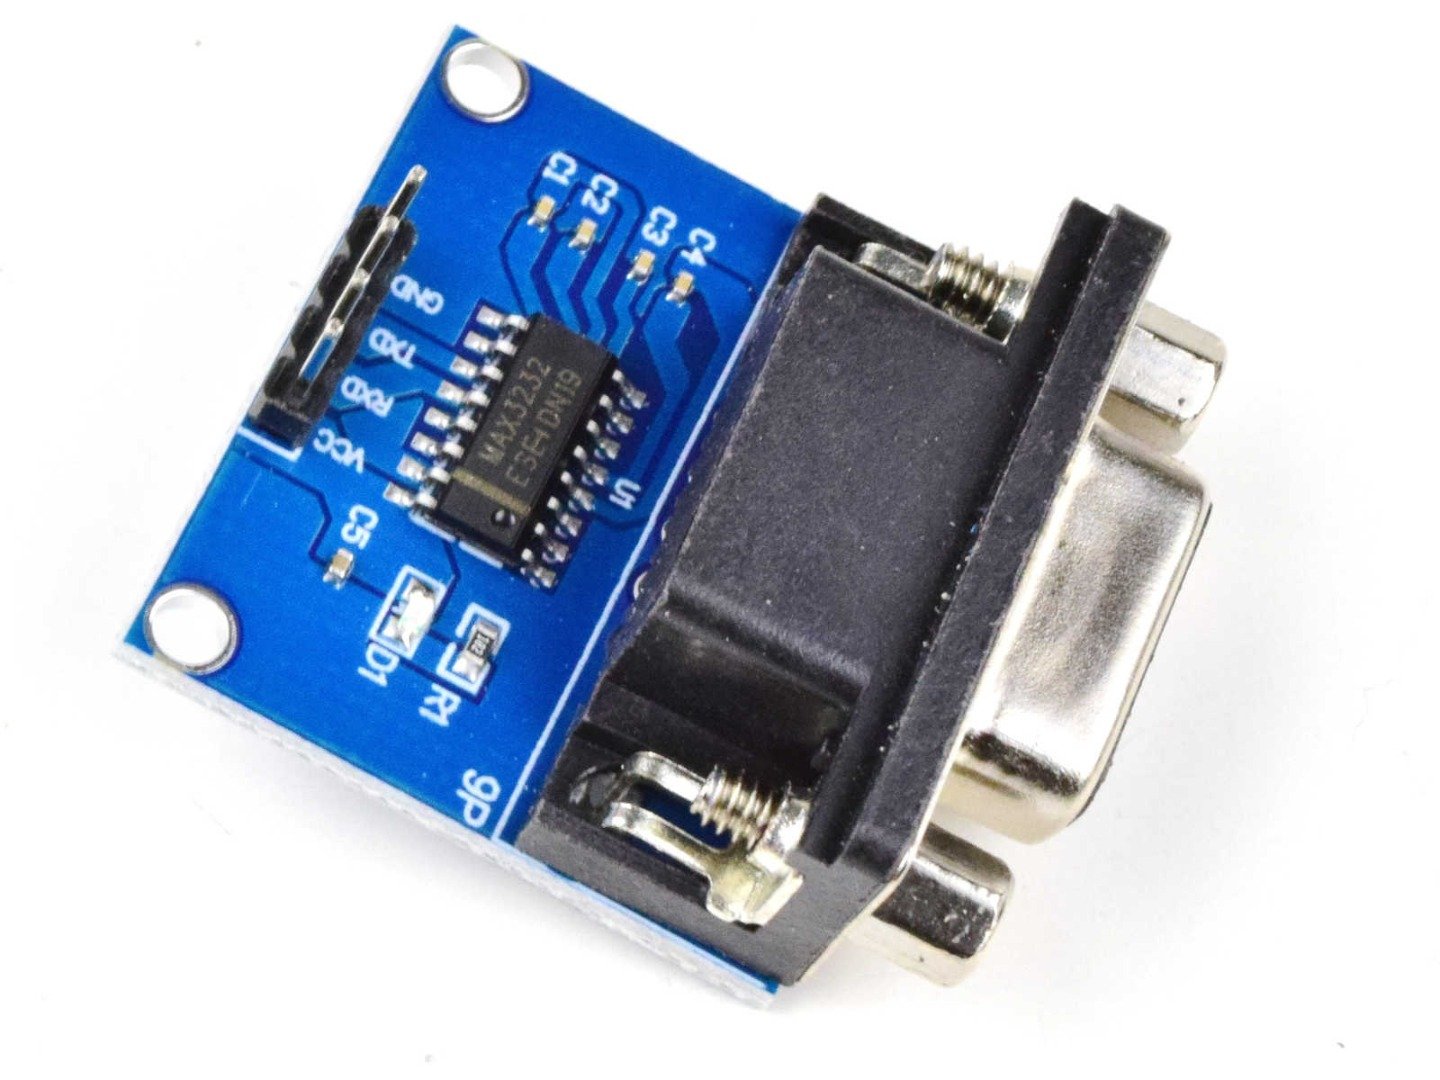 RS232 to TTL adapter MAX232, provides RS232 port for MCU or Arduino 9